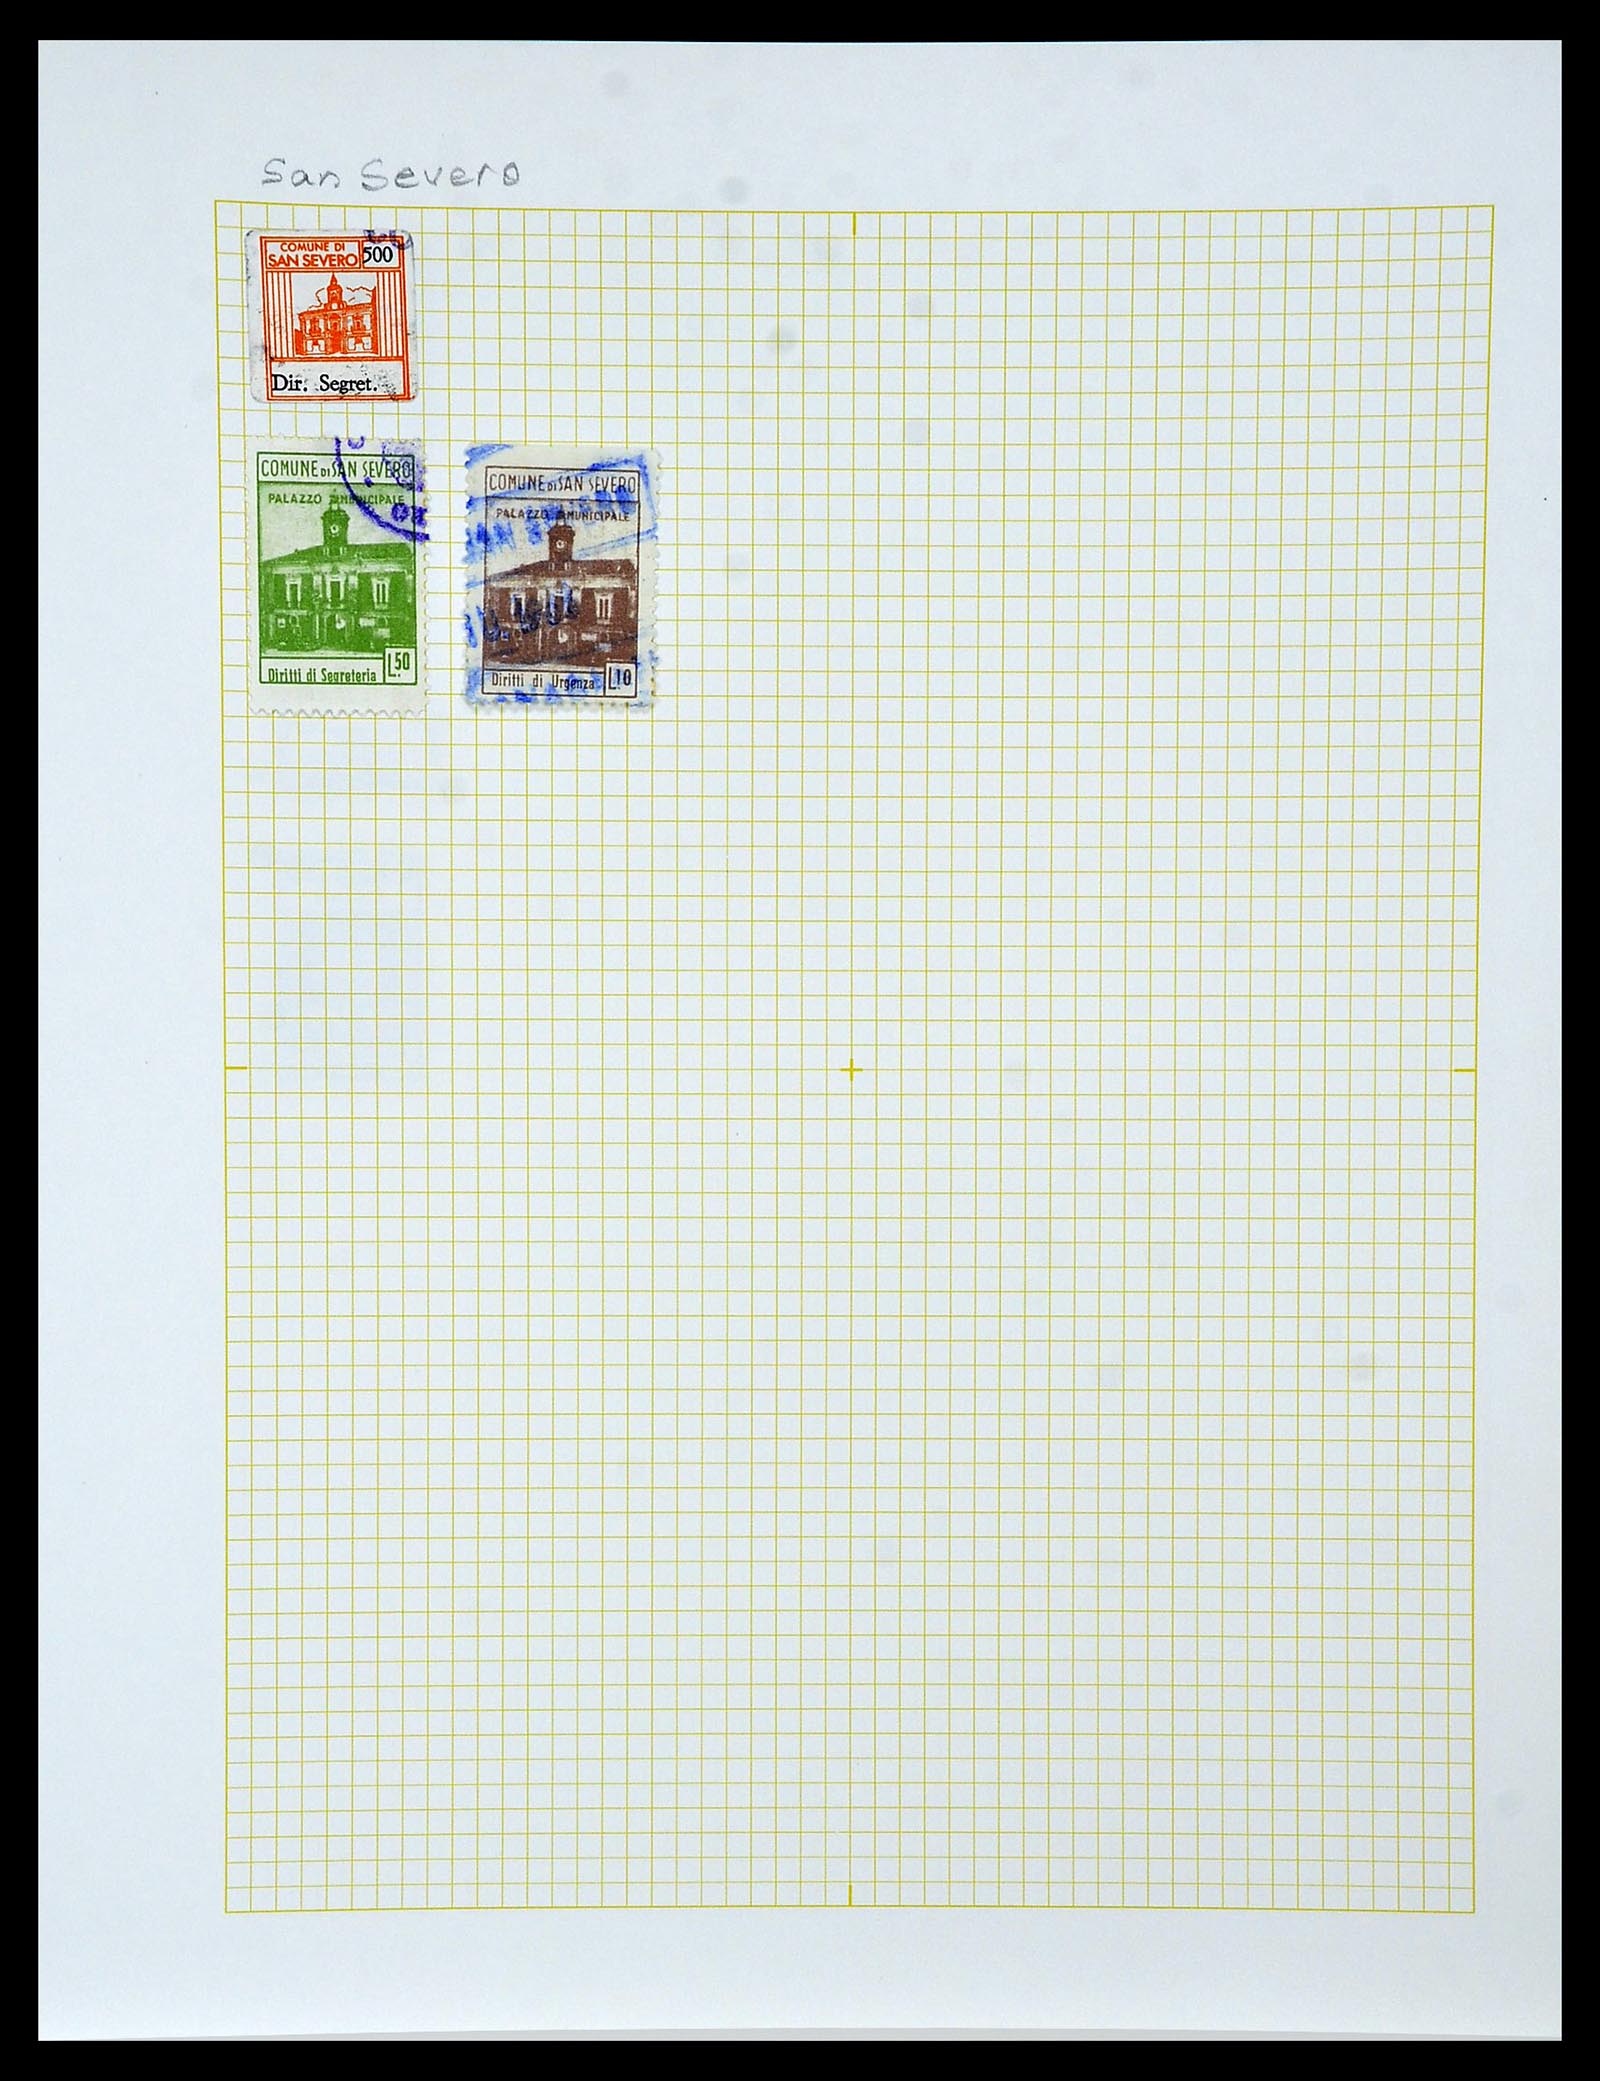 34330 076 - Stamp collection 34330 World fiscal and cinderella's.